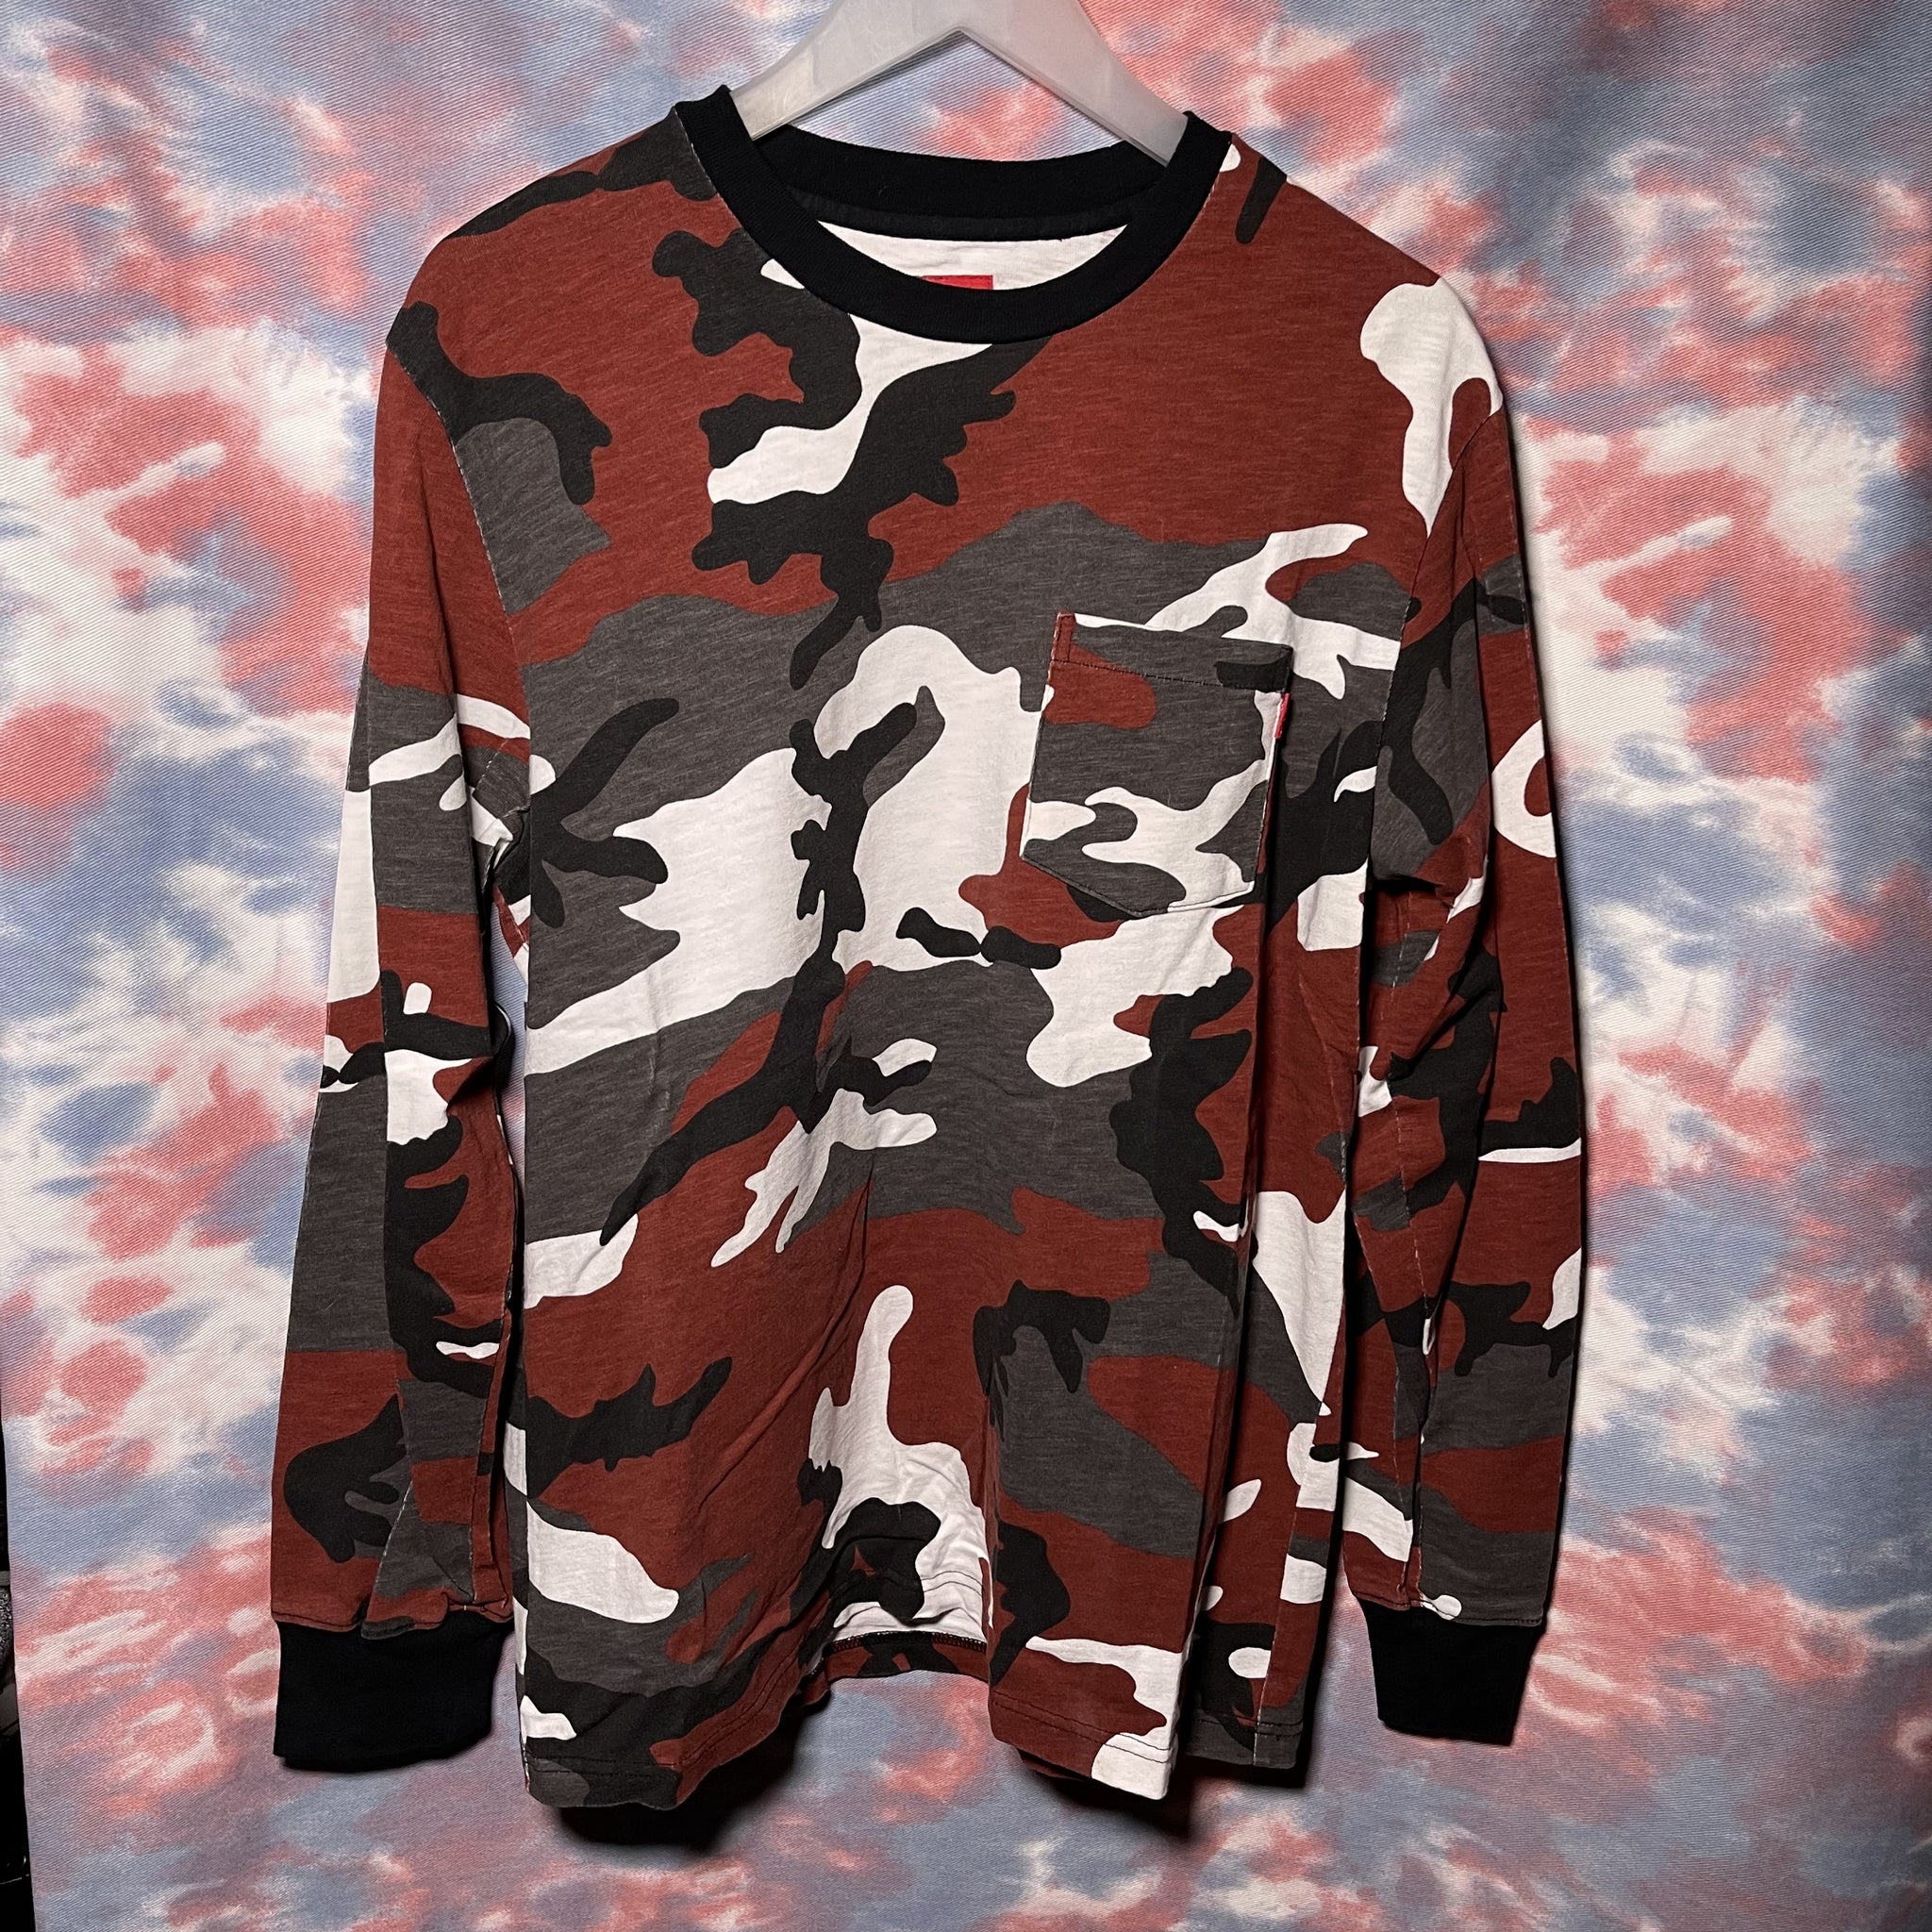 Supreme pocket tee long sleeve size M pkt dark red camo 棗紅色迷彩